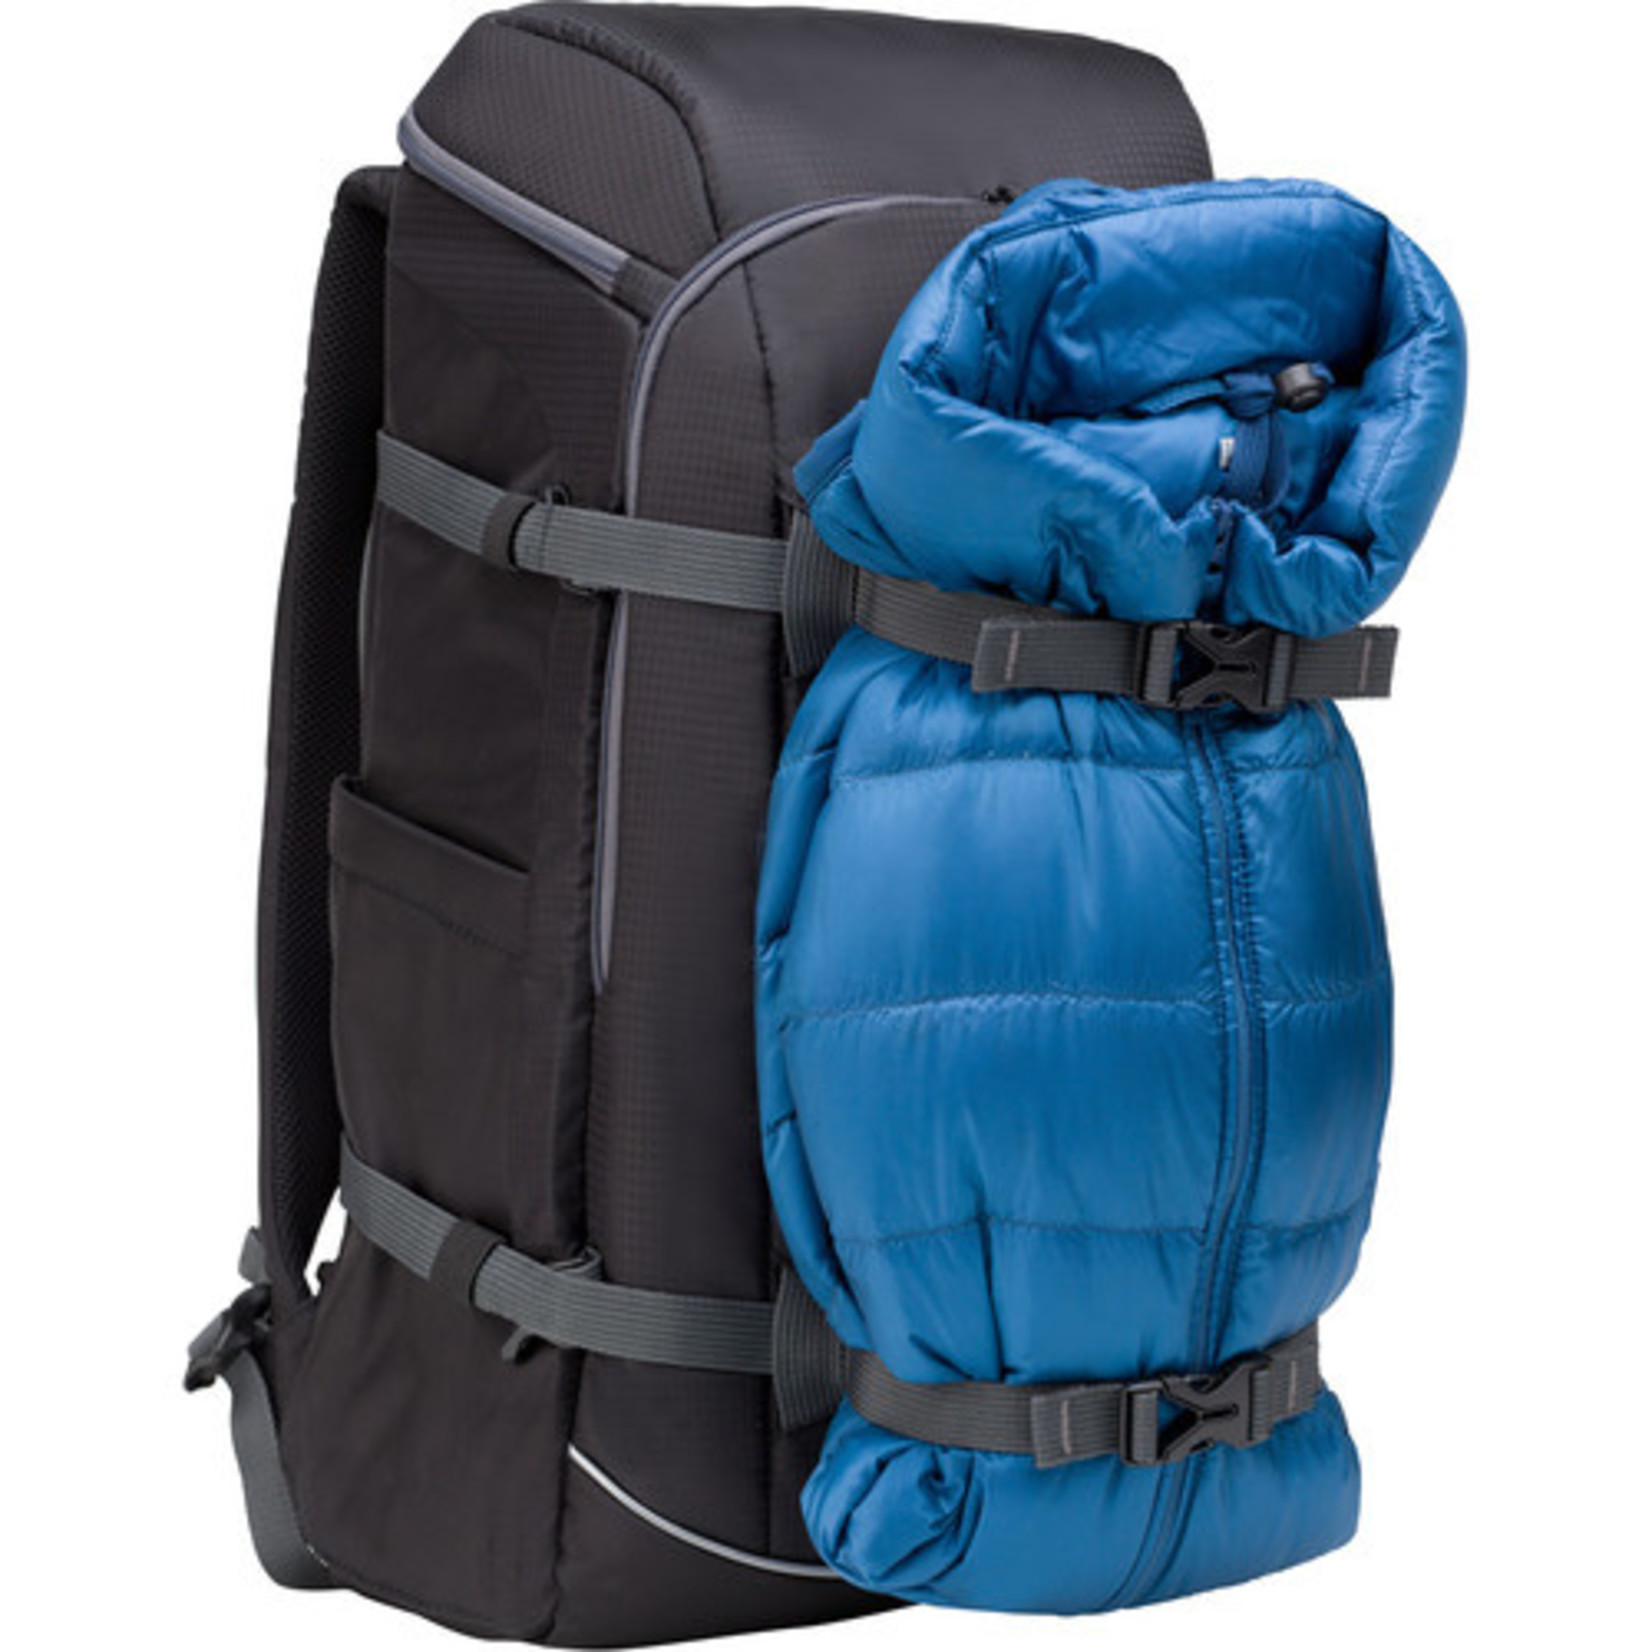 LANTC20, 20L Small Backpack